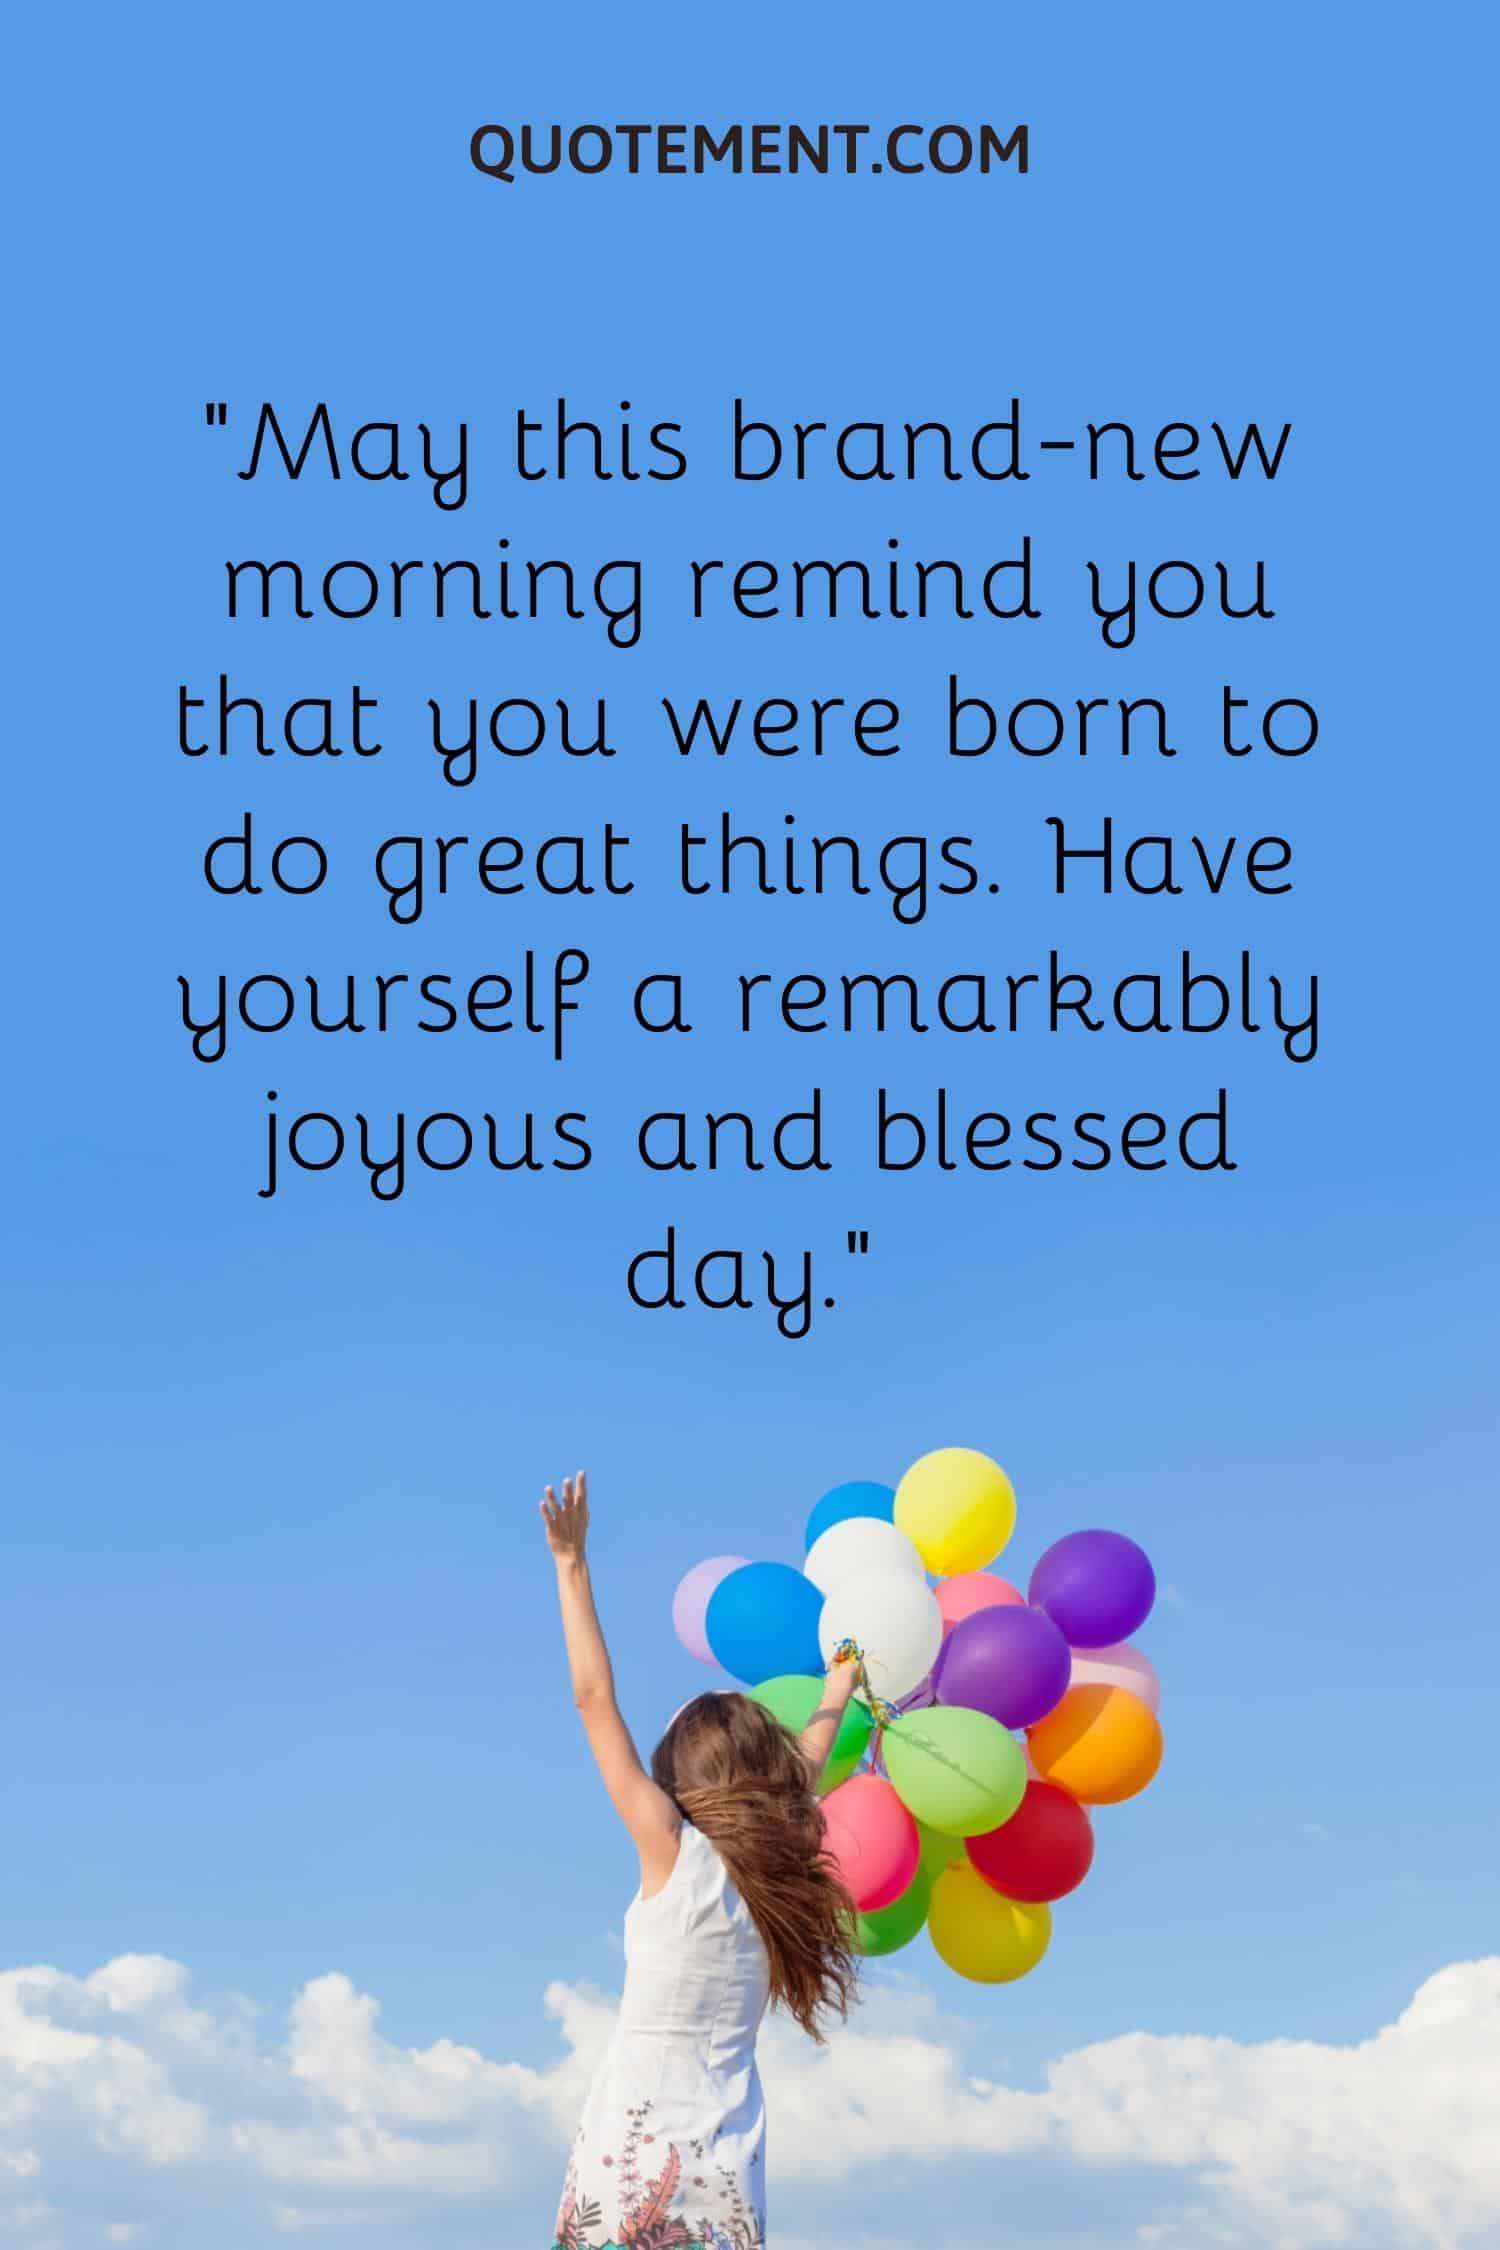 May this brand-new morning remind you that you were born to do great things